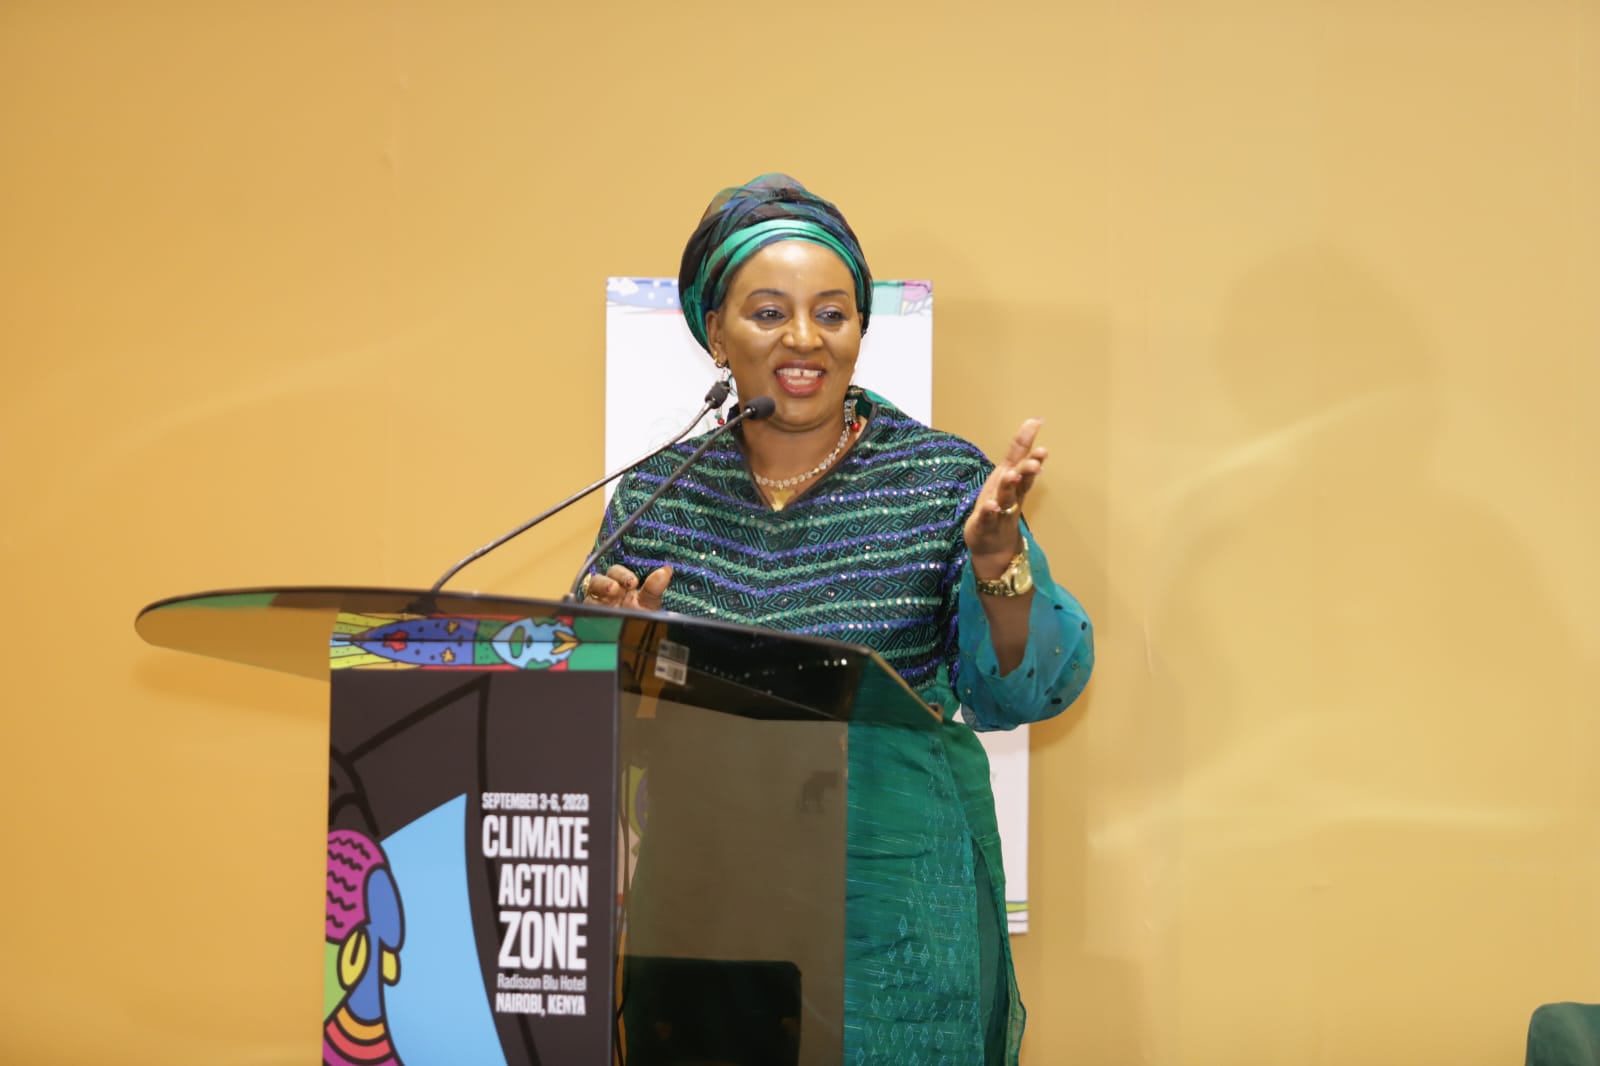 Dr Sheila Ochugboju, the Alliance for Science Executive Director, addressing participants at the Climate Action Zone.